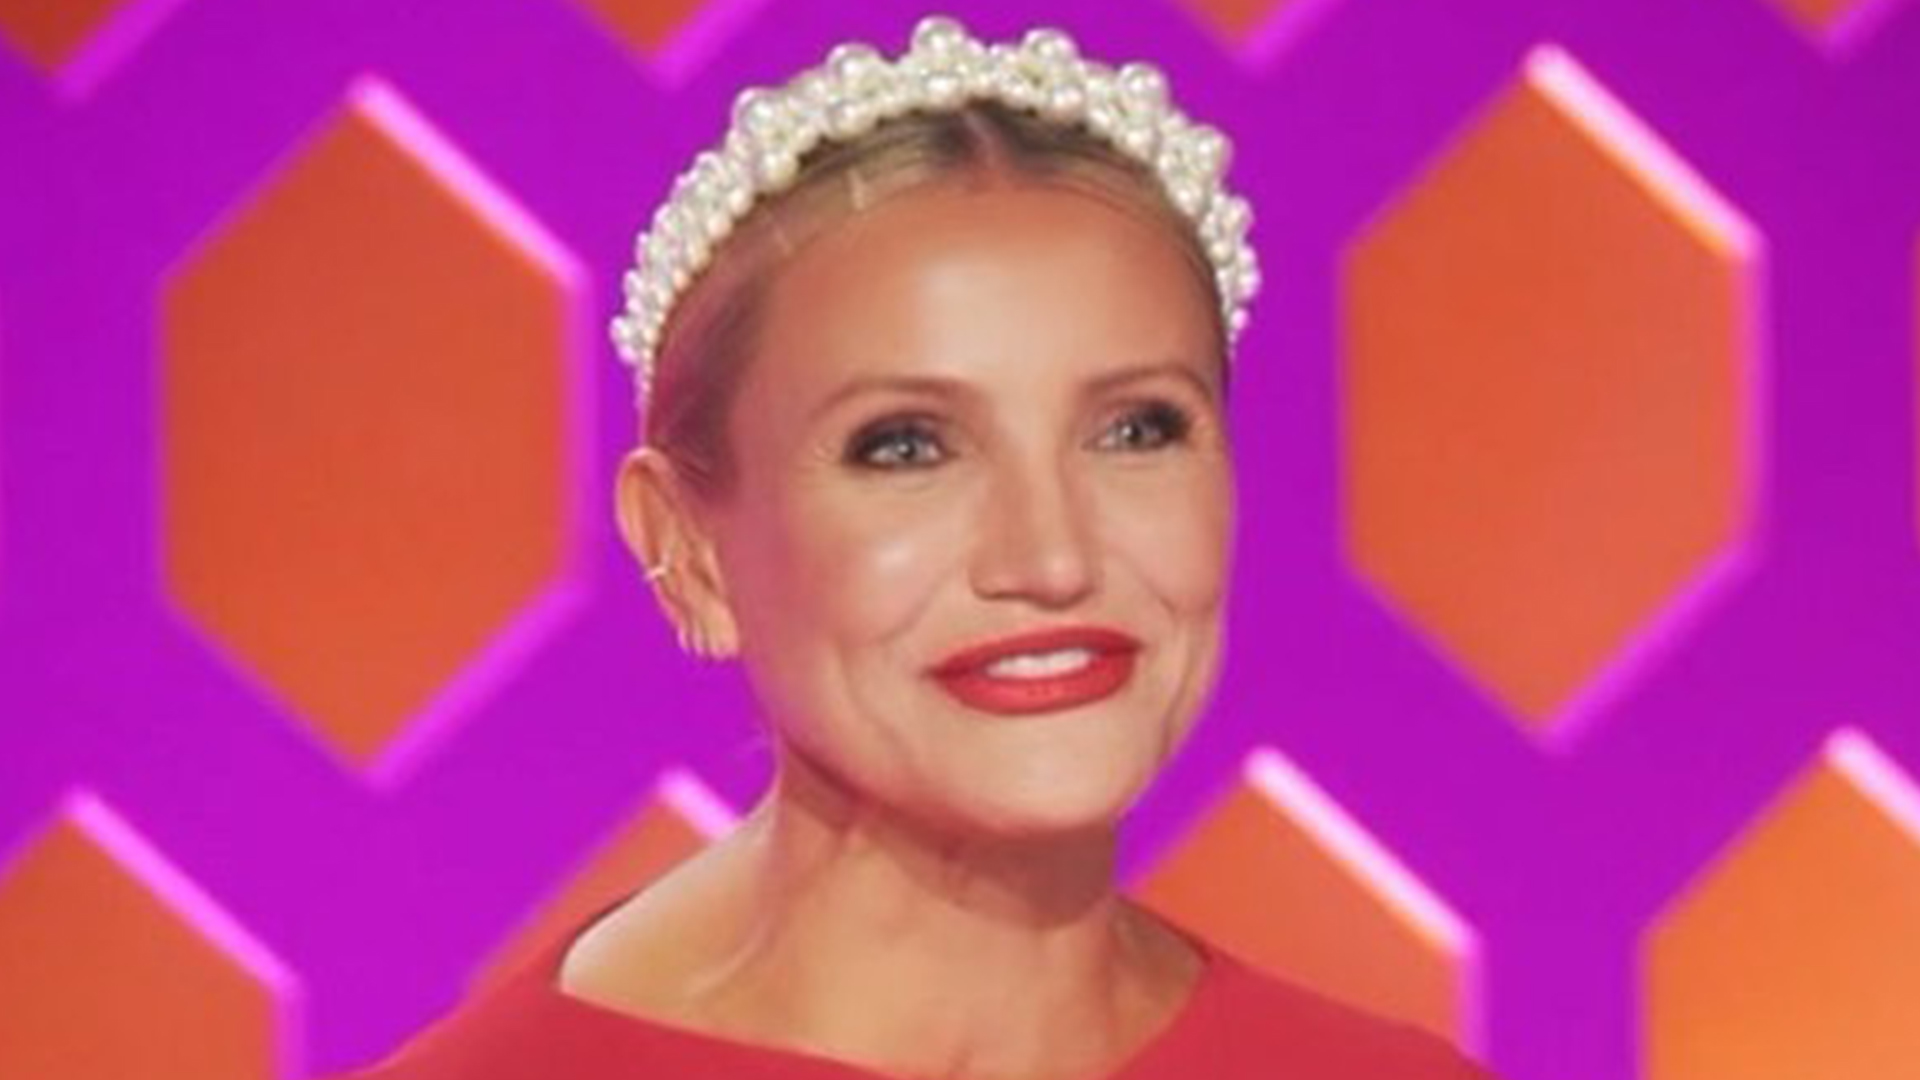 Cameron Diaz STUNS in rare appearance as she resurfaces for RuPaul show cameo